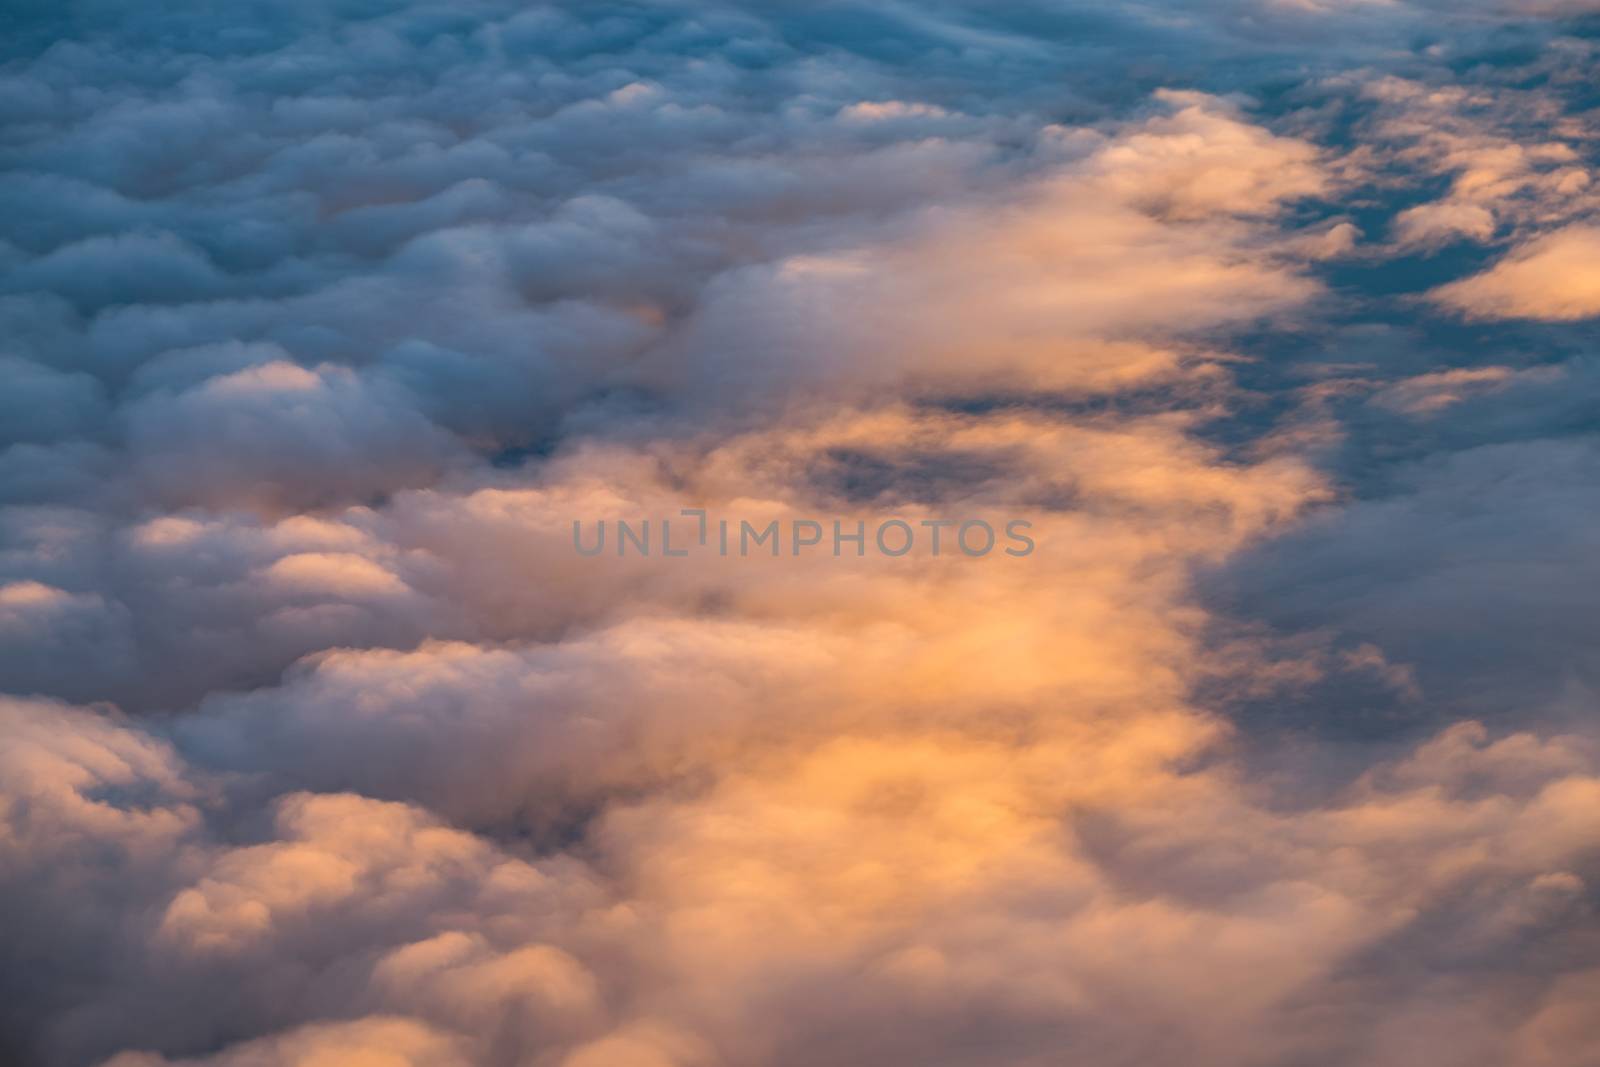 reflect sunlight cloud view from airplane window by luckyfim